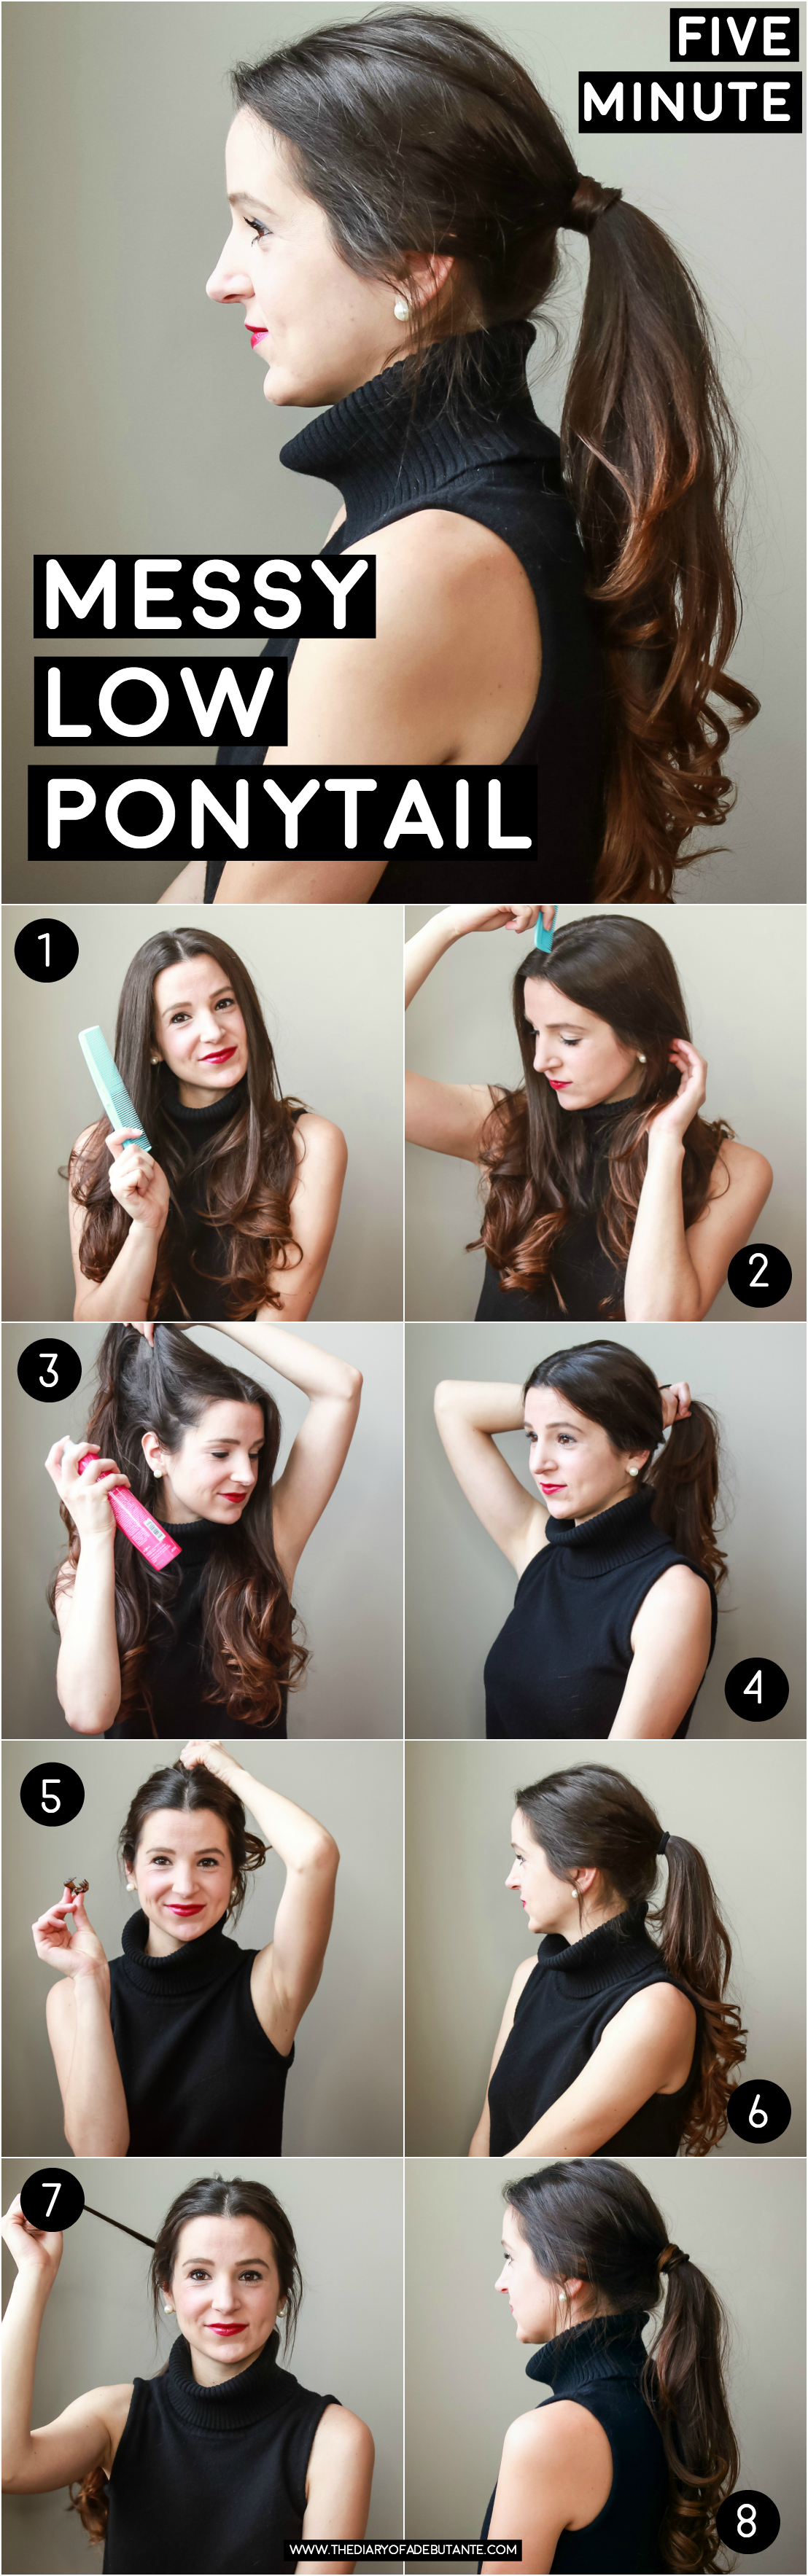 5-minute messy low ponytail hair tutorial by southern blogger Stephanie Ziaka from Diary of a Debutante